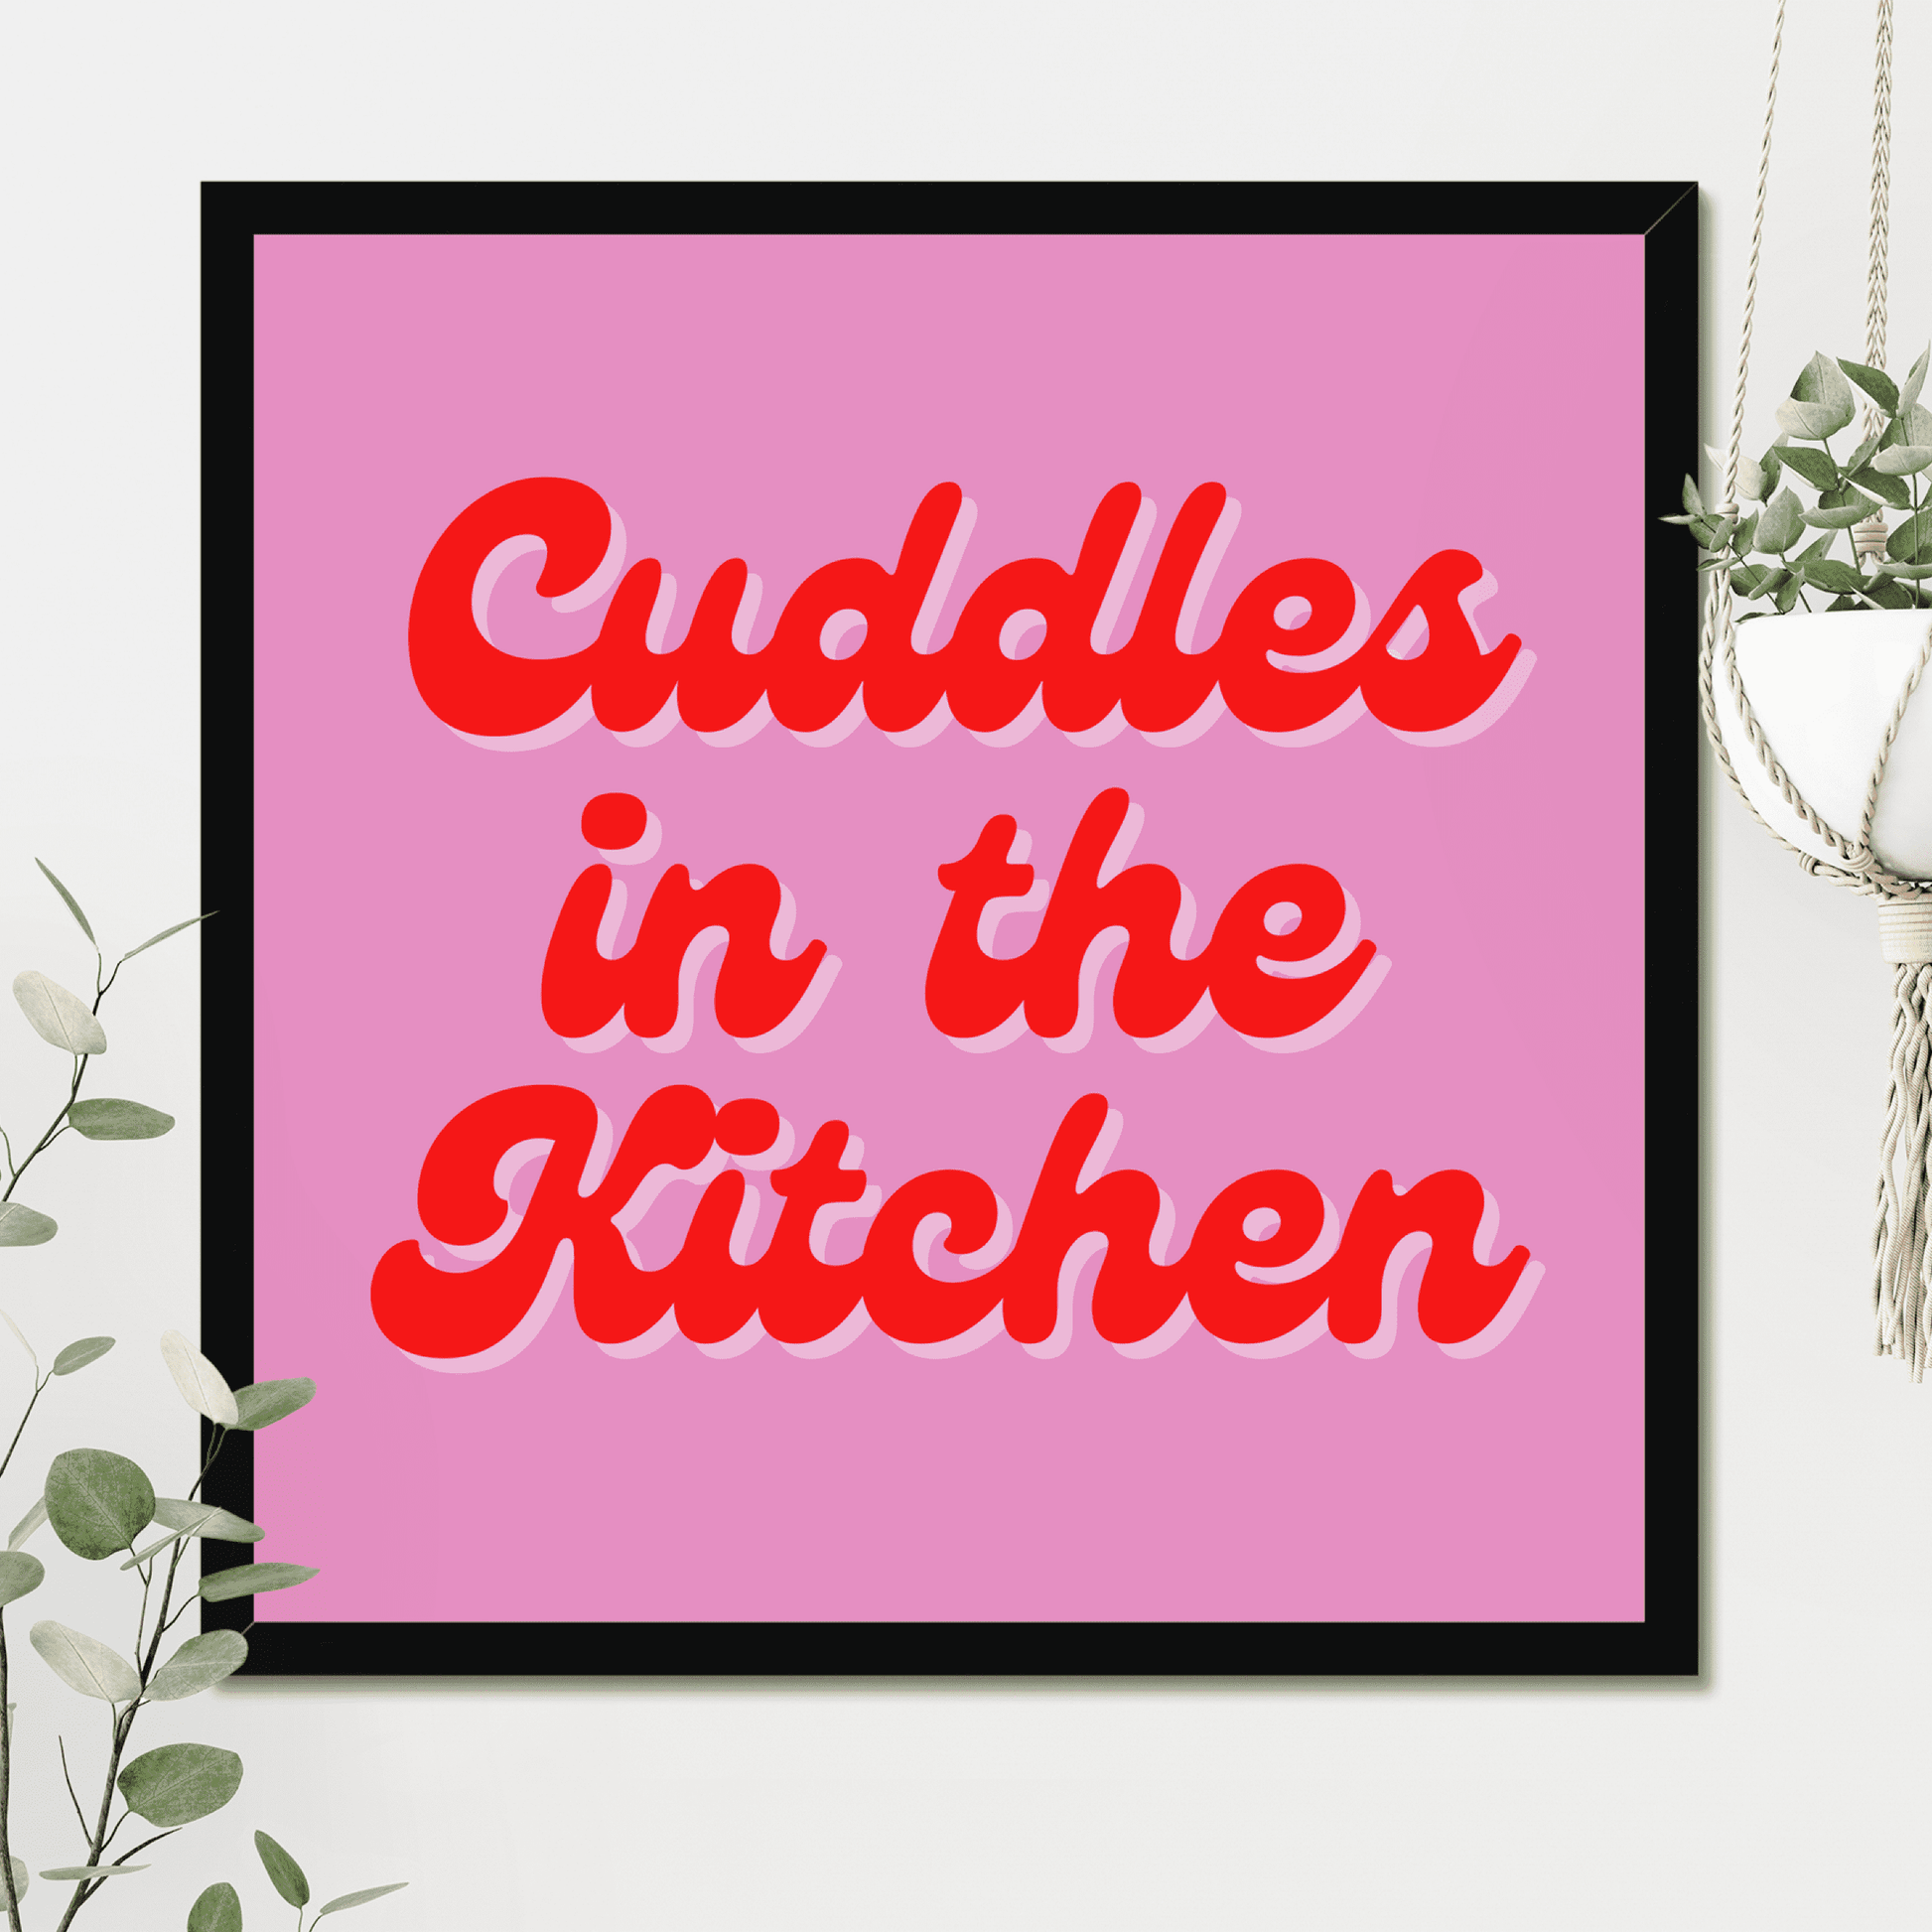 Cuddles in the kitchen art print. A bright and quirky print to make a fun statement in your home. A pink background with a red retro font. We love this Arctic Monkeys, Mardy Bum inspired print.